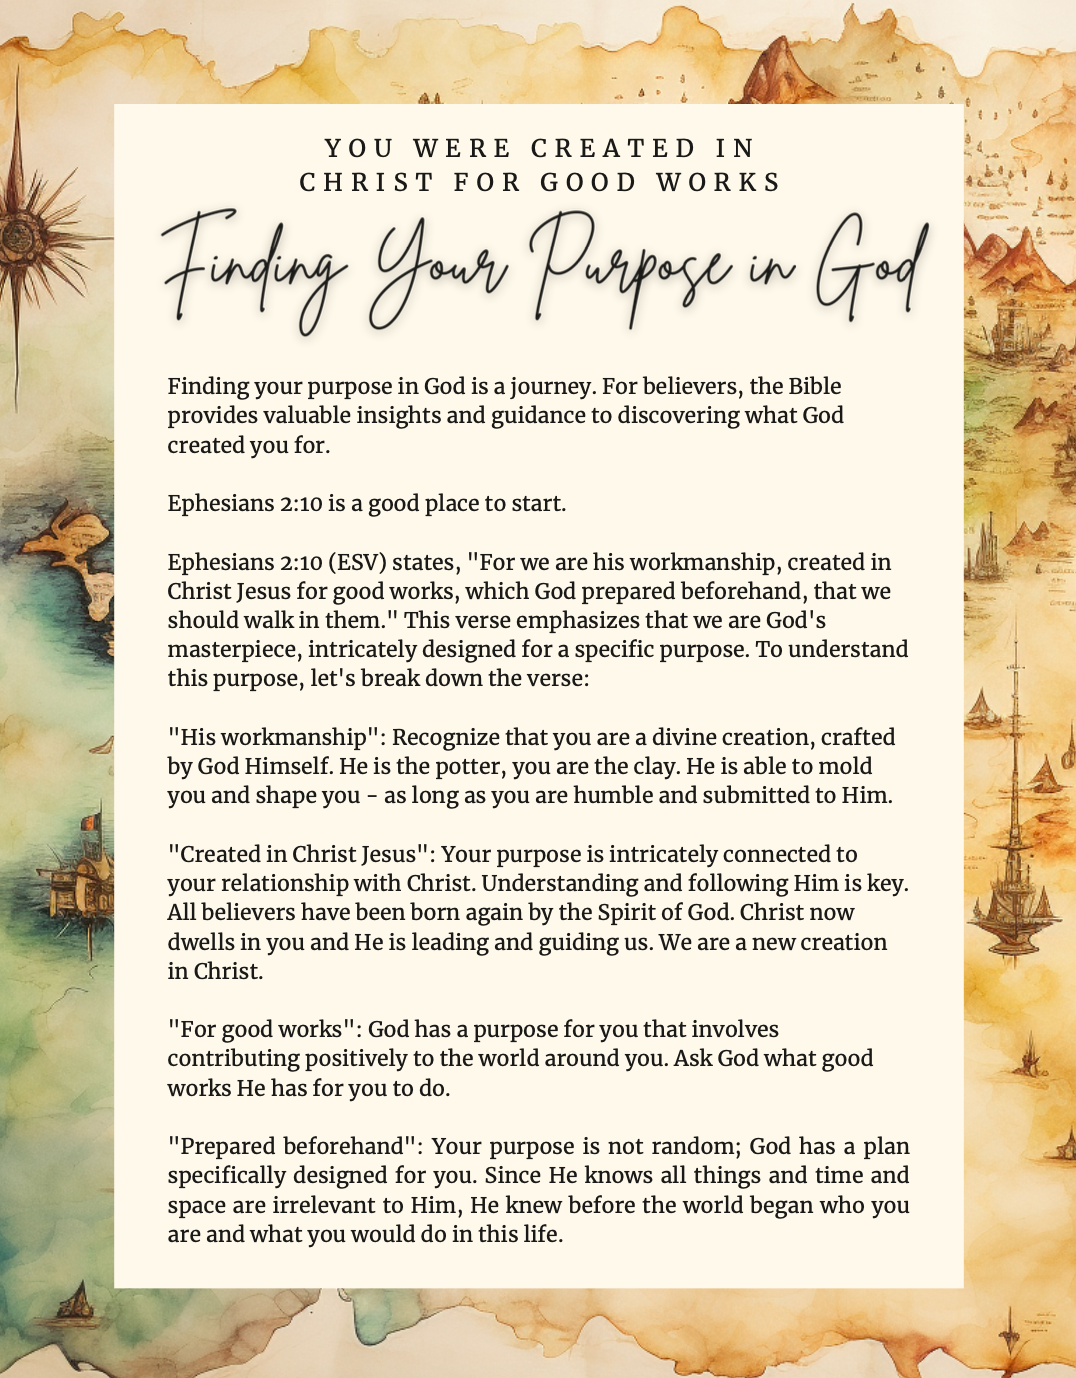 Finding Your Purpose in God: An Interactive Mini-Bible Study Guide